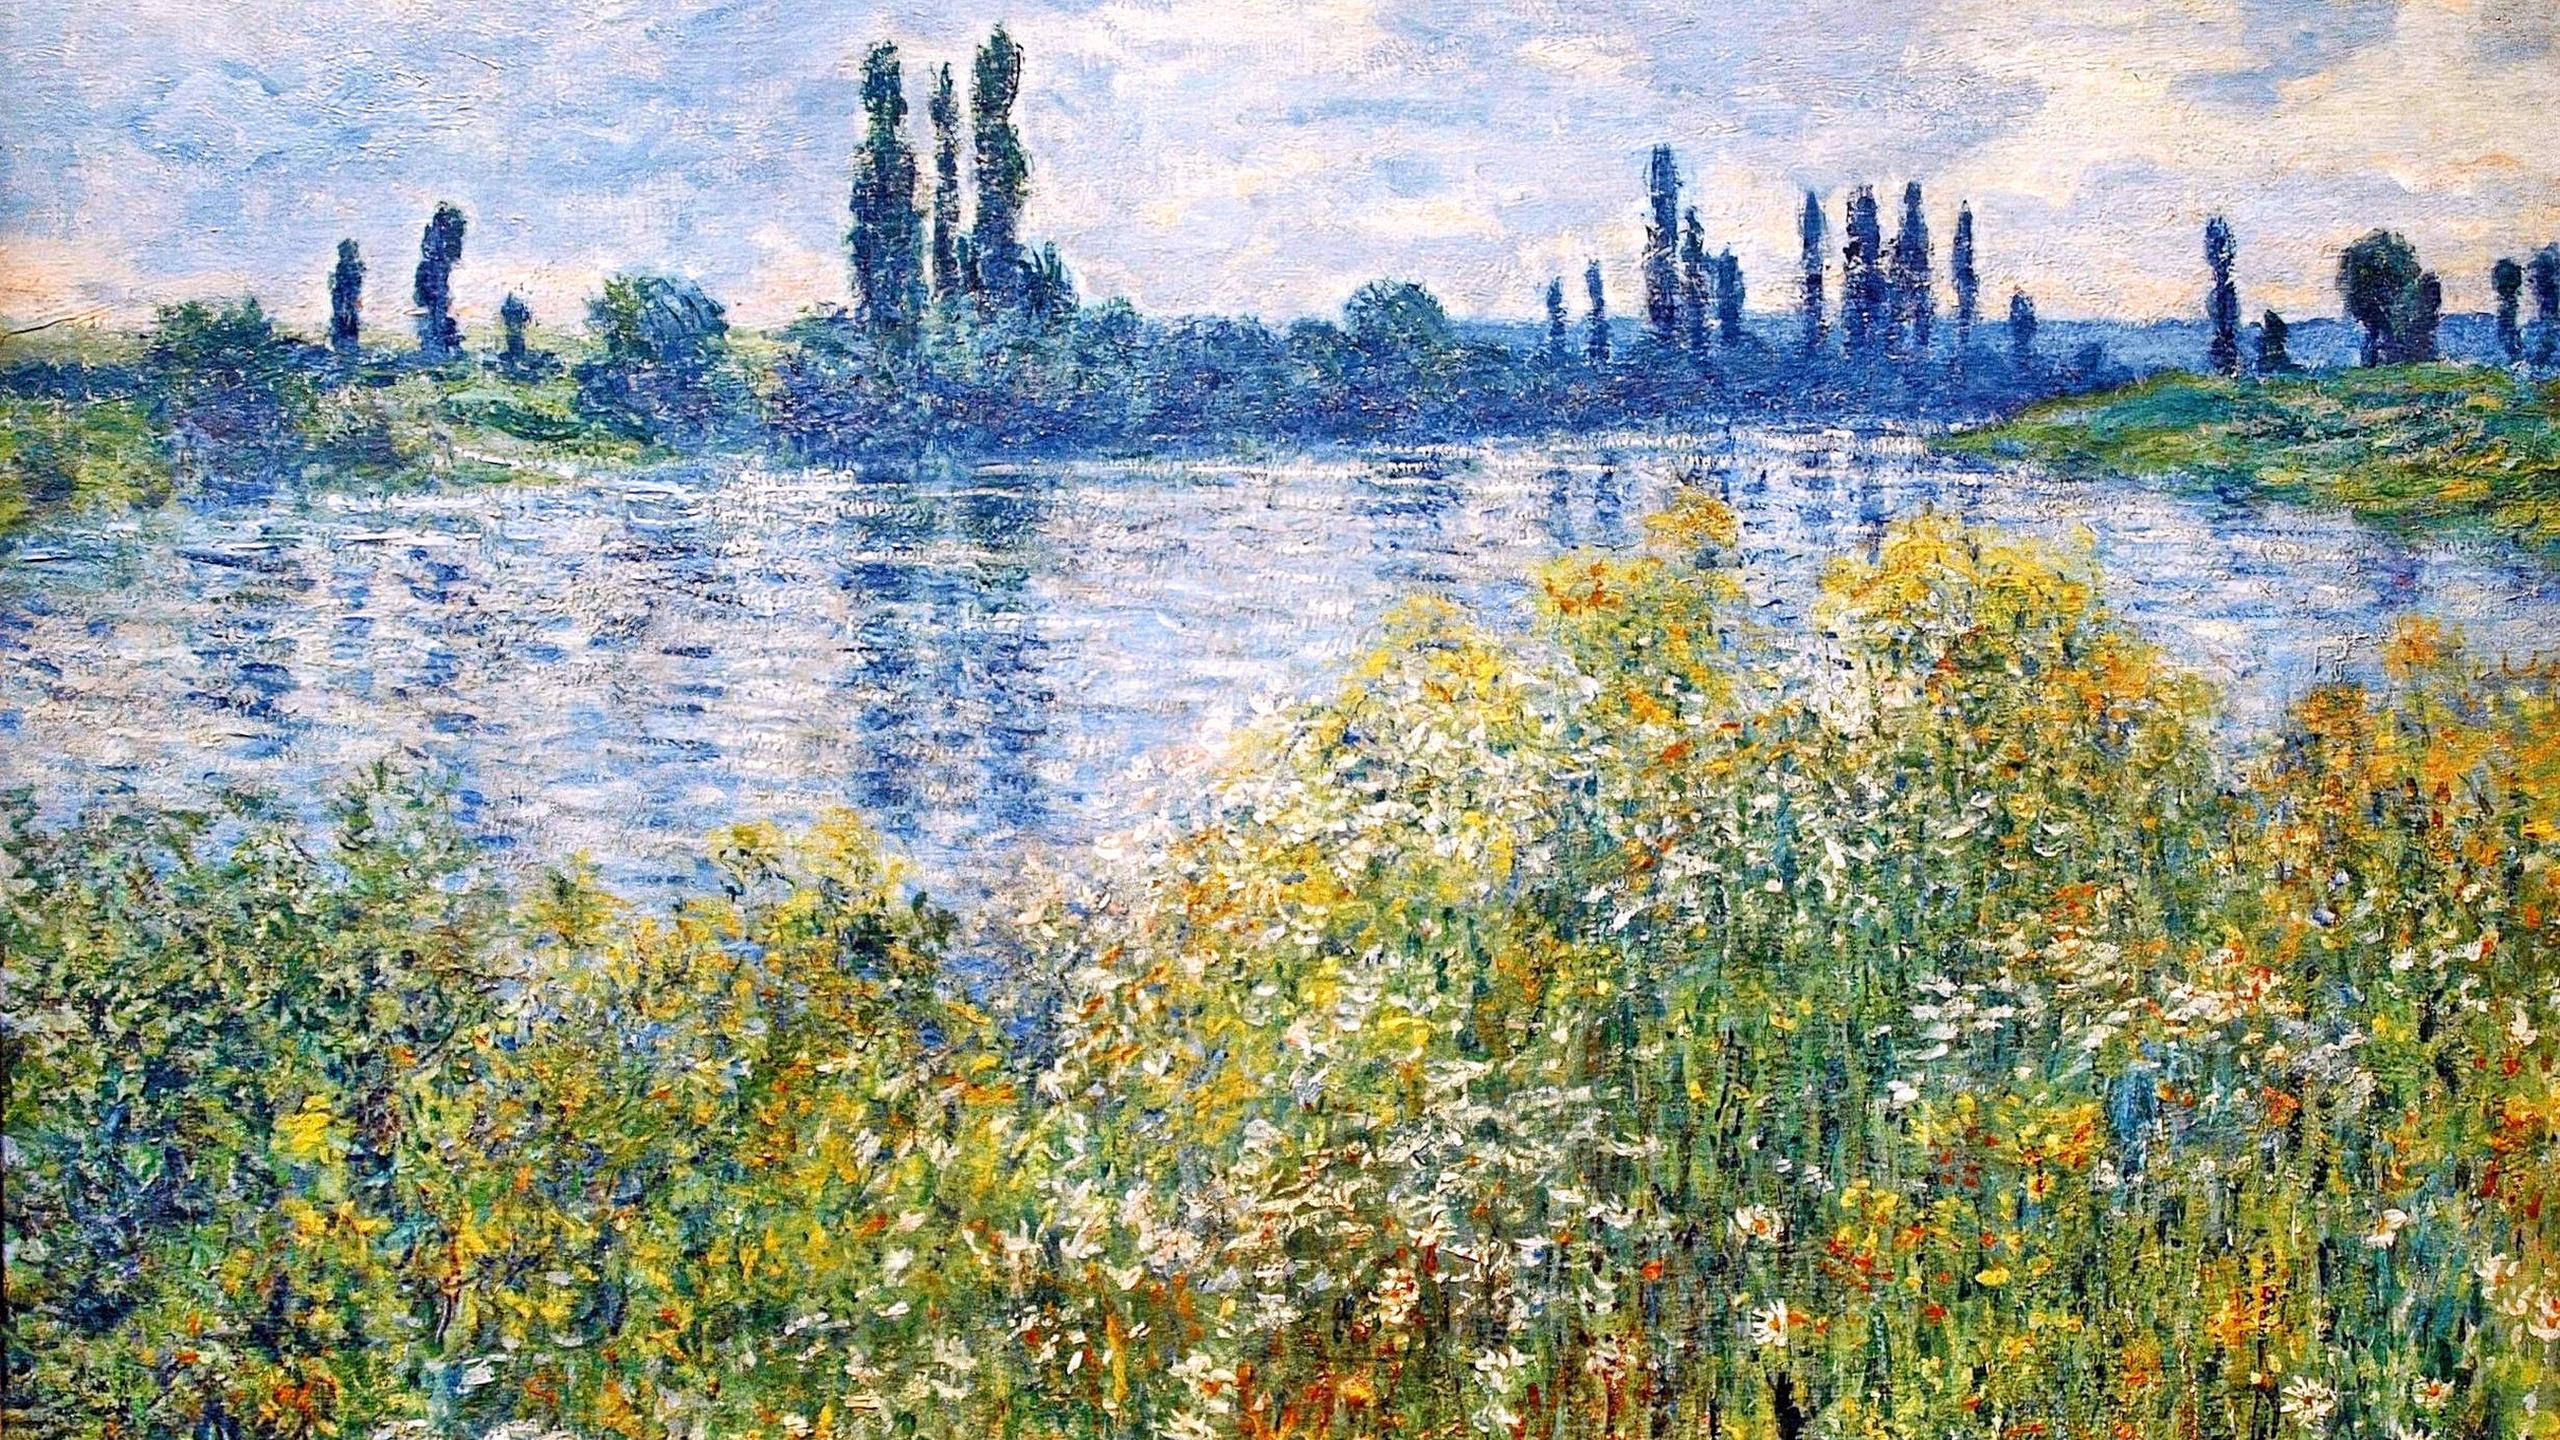 French Paintings, Claudemonetworks, Monet Art, Arts